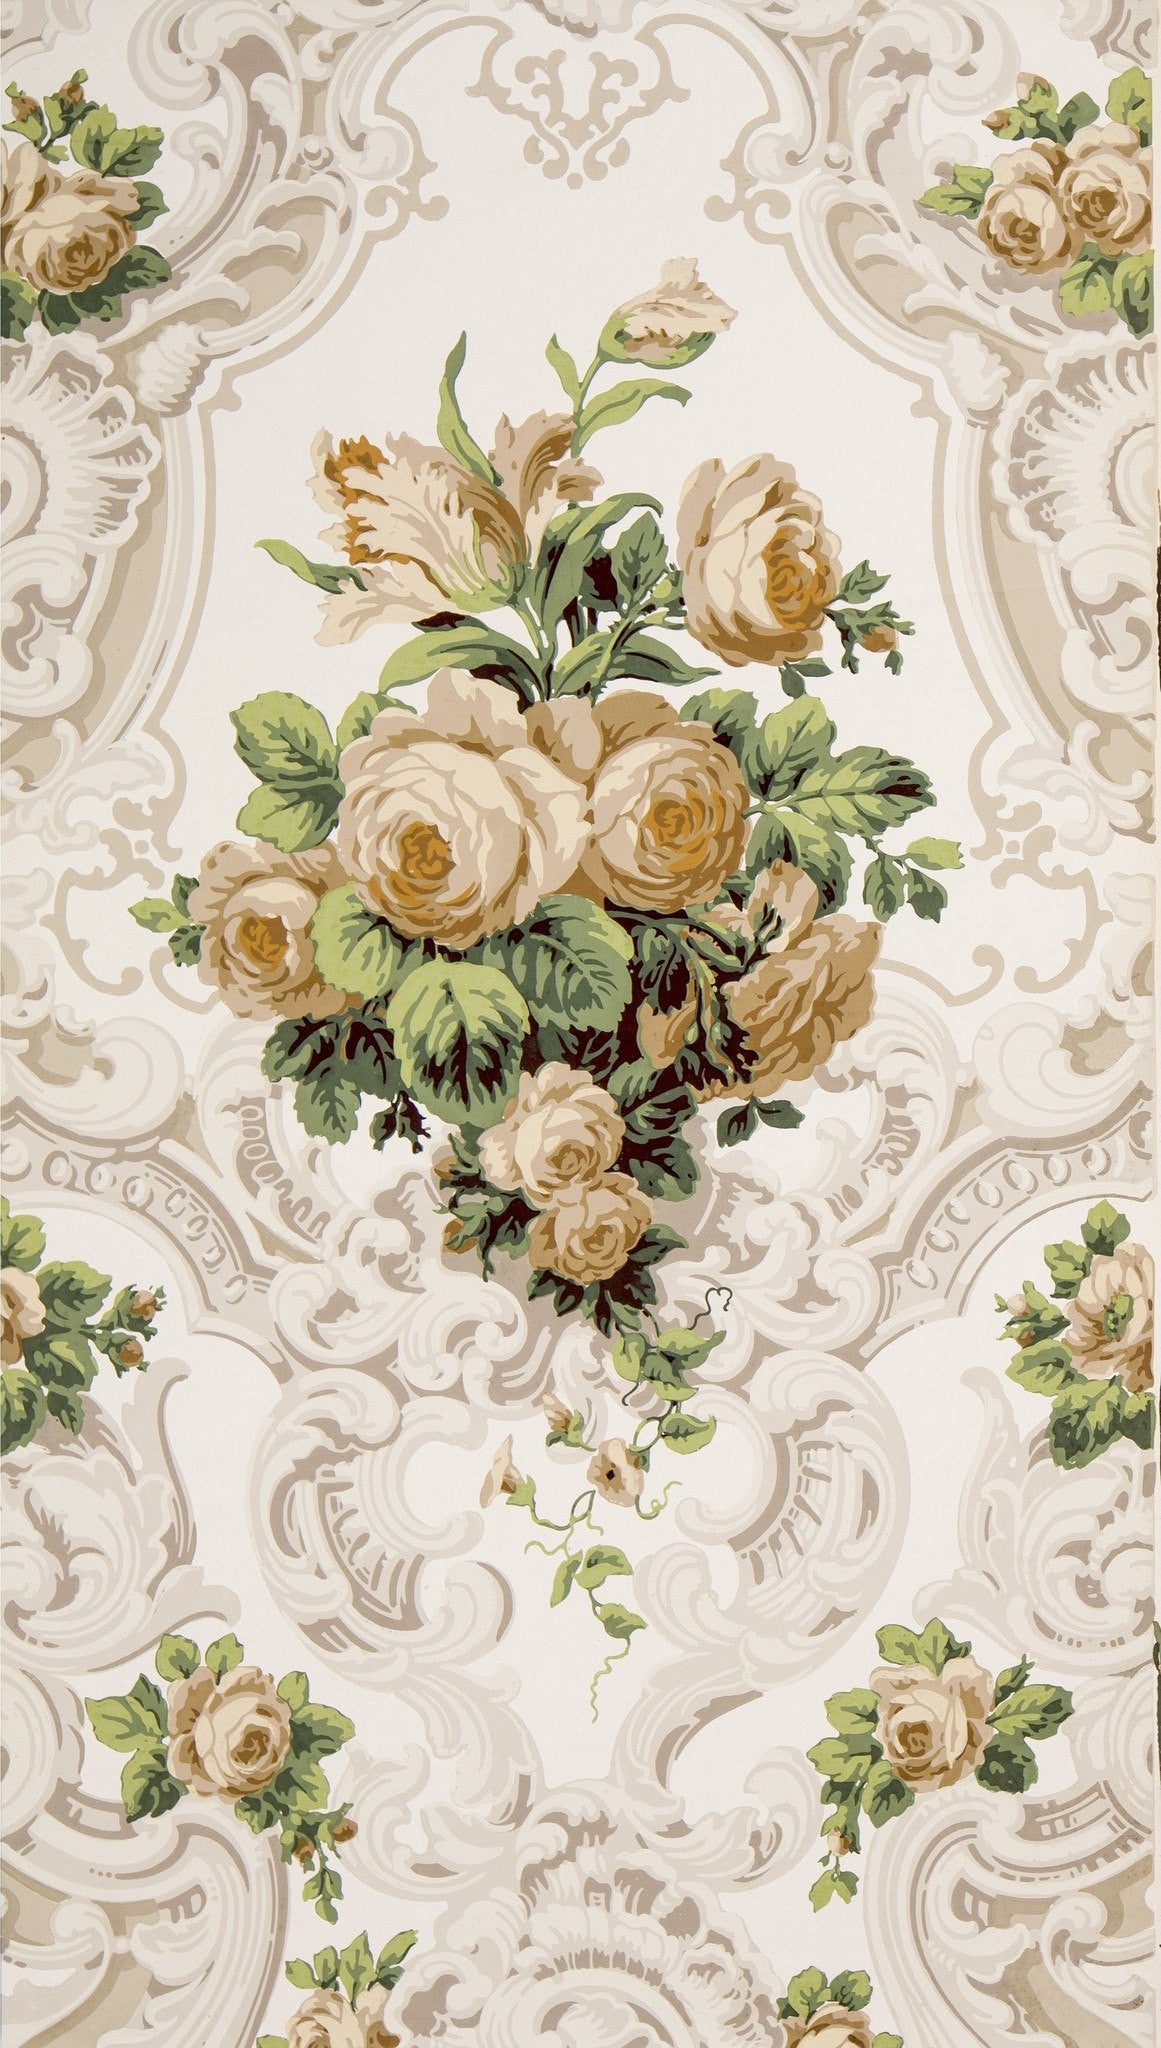 Large Rose Bouquets in Rococo Scrolls - Antique Wallpaper Remnant